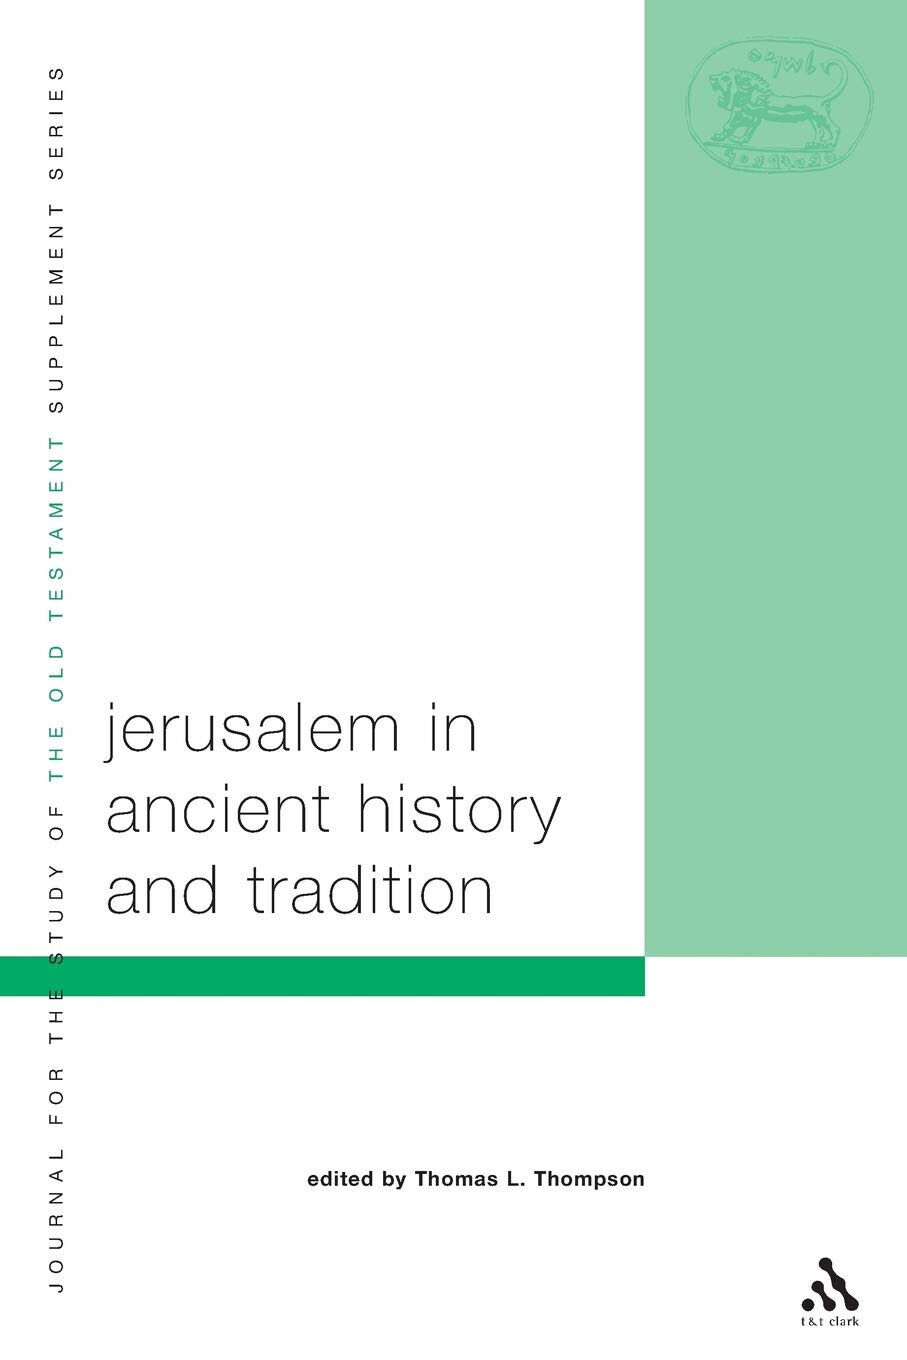 Jerusalem in Ancient History and Tradition - Thomas L. Thompson - 2004